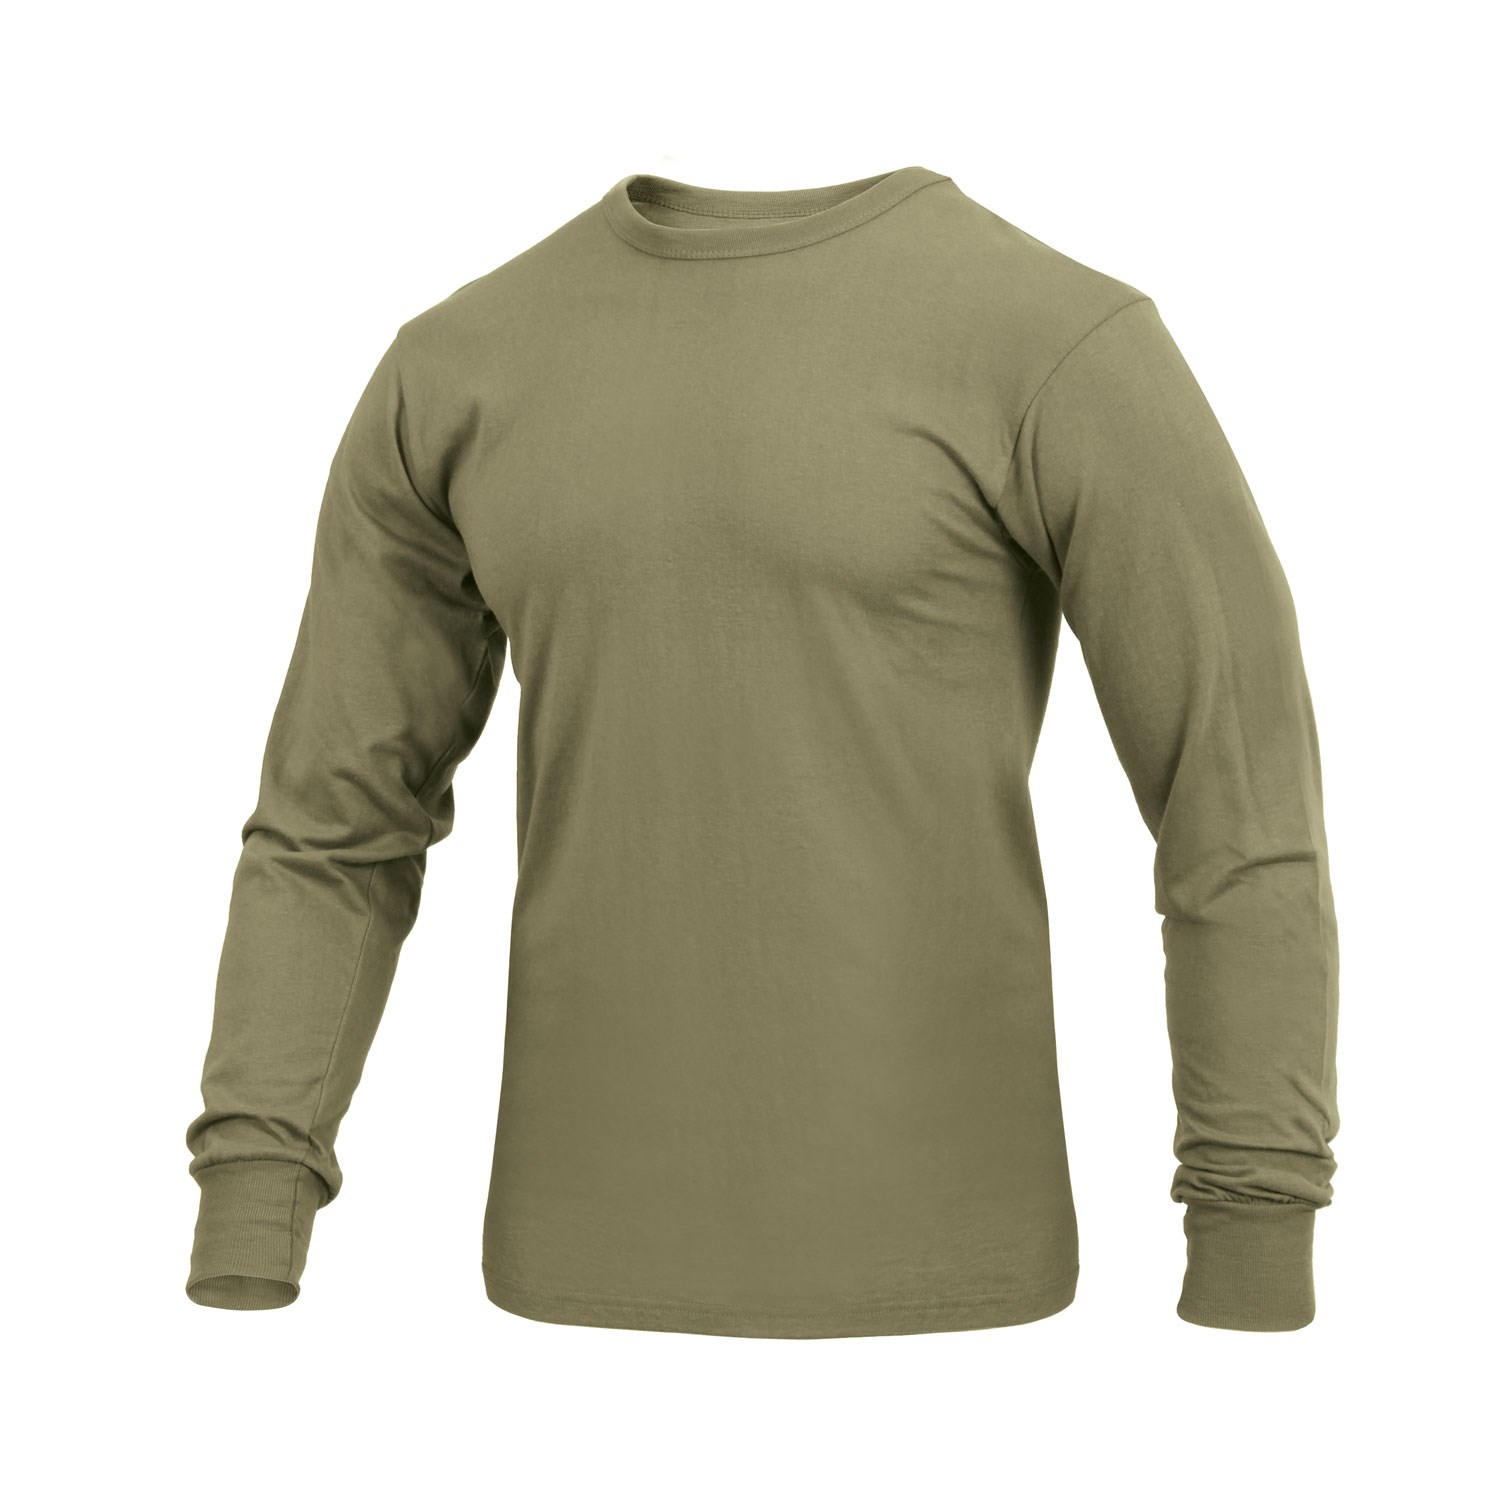 T-SHIRT Long sleeve SOLID COYOTE BROWN ROTHCO 3727 L-11